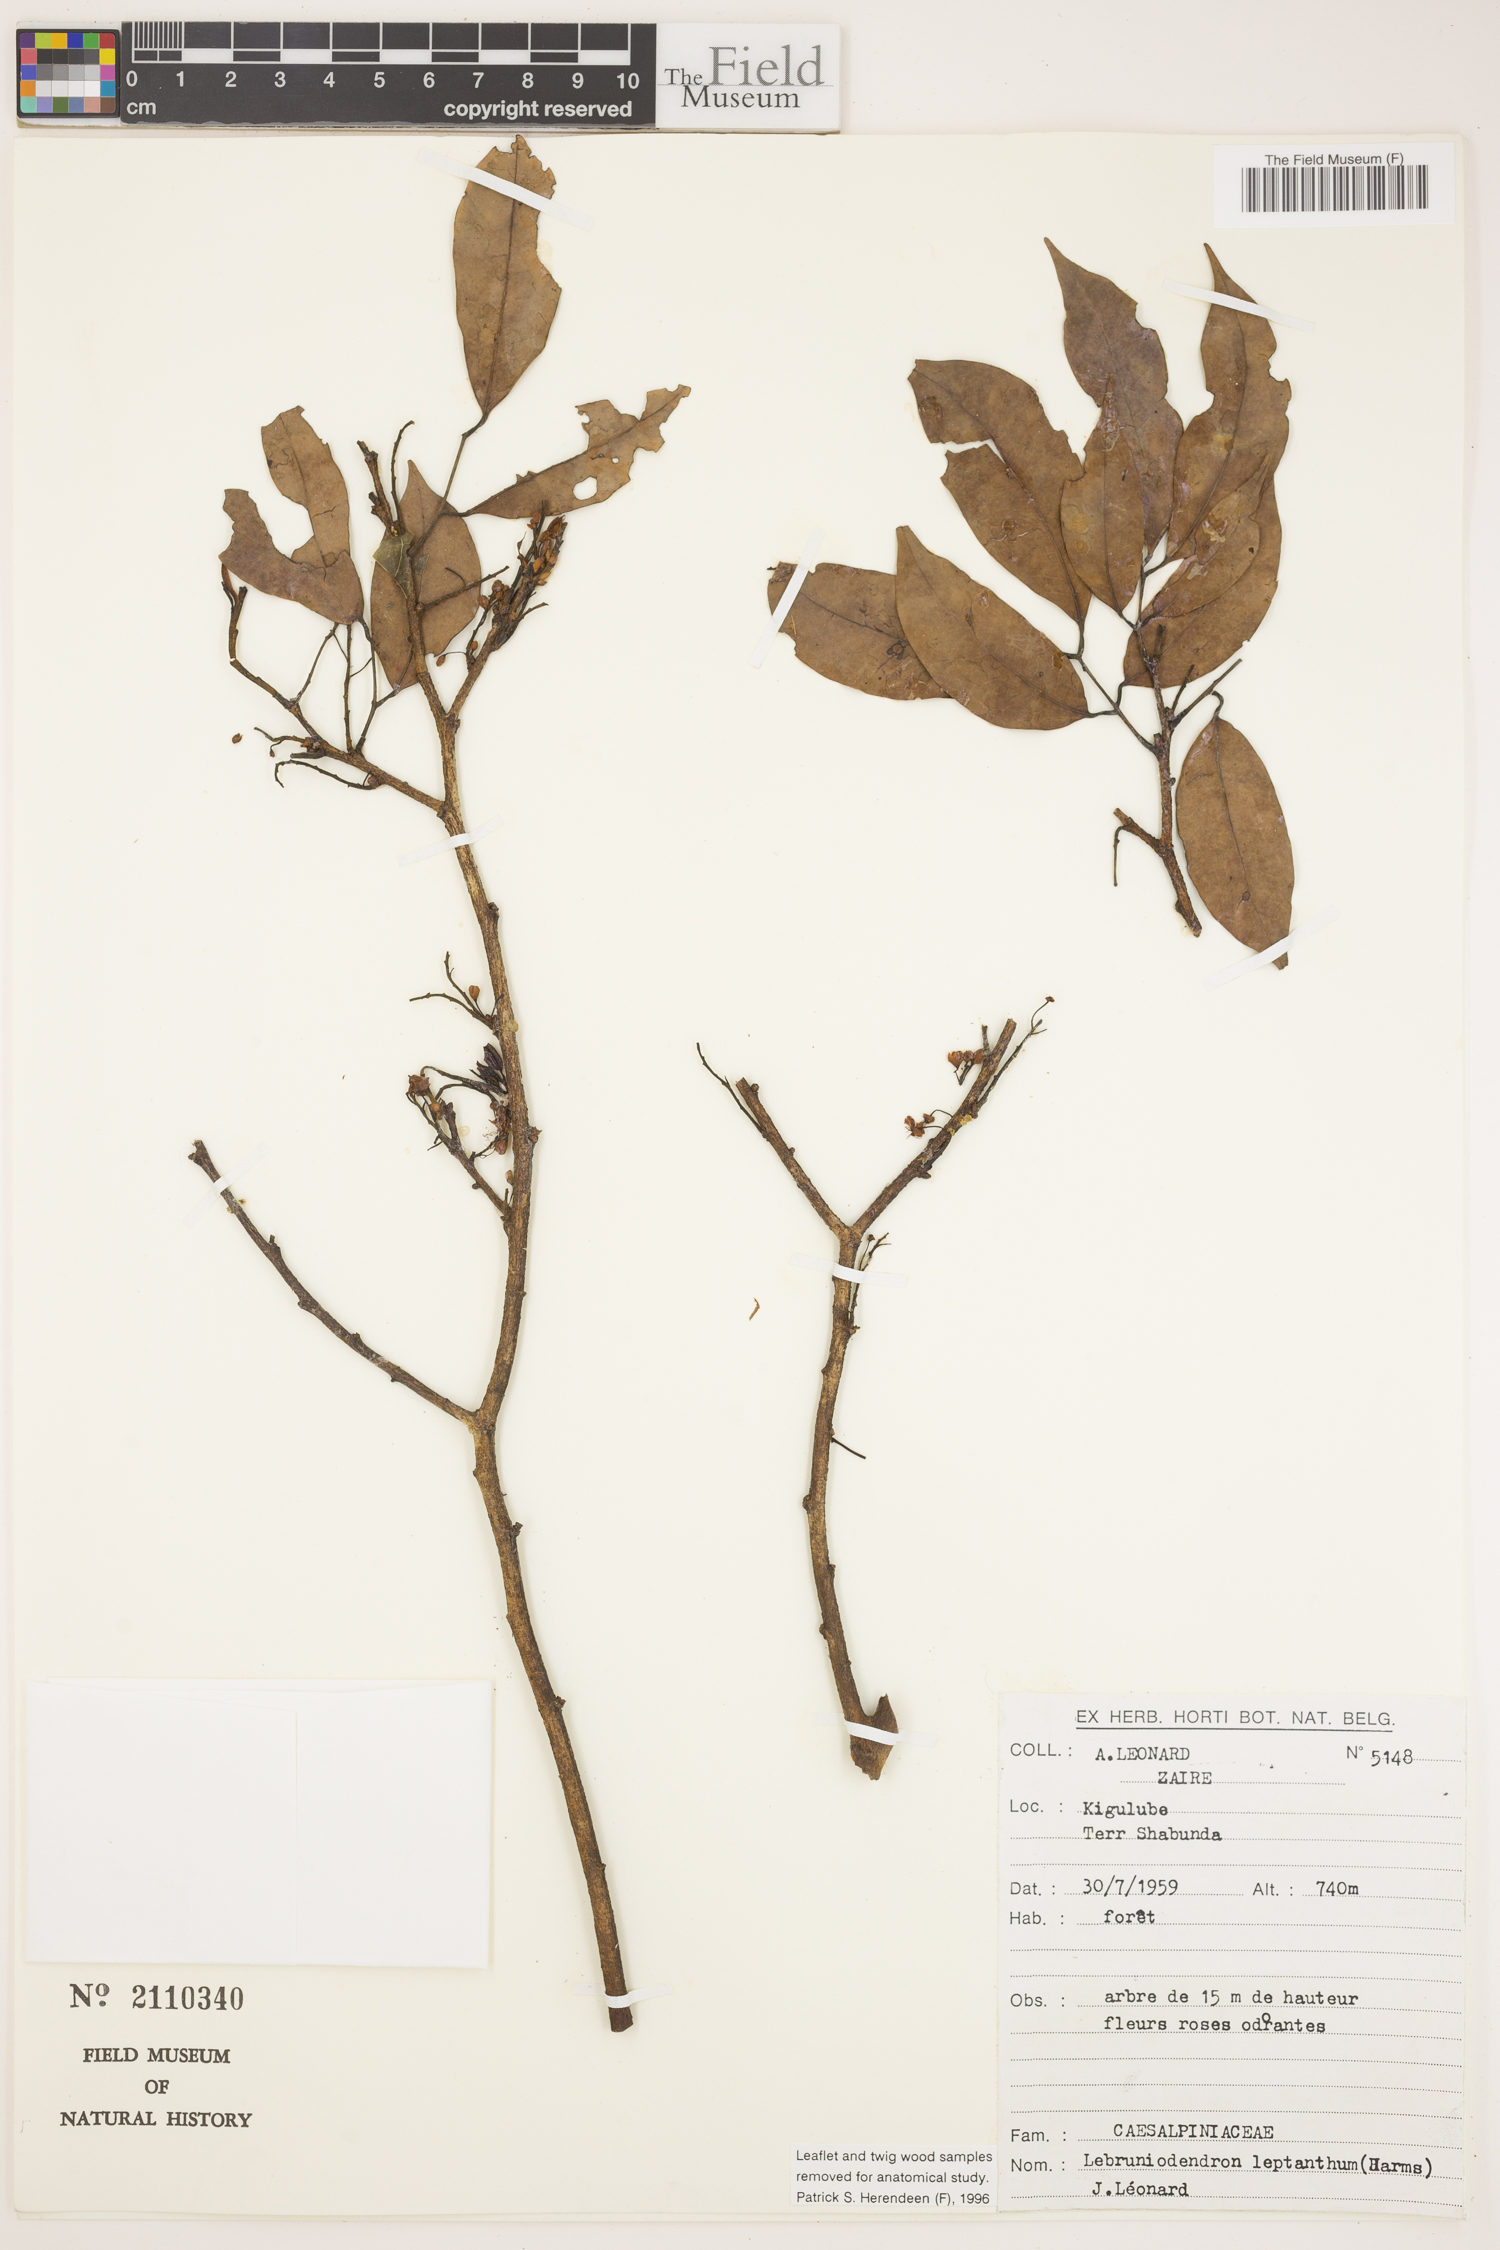 Lebruniodendron image